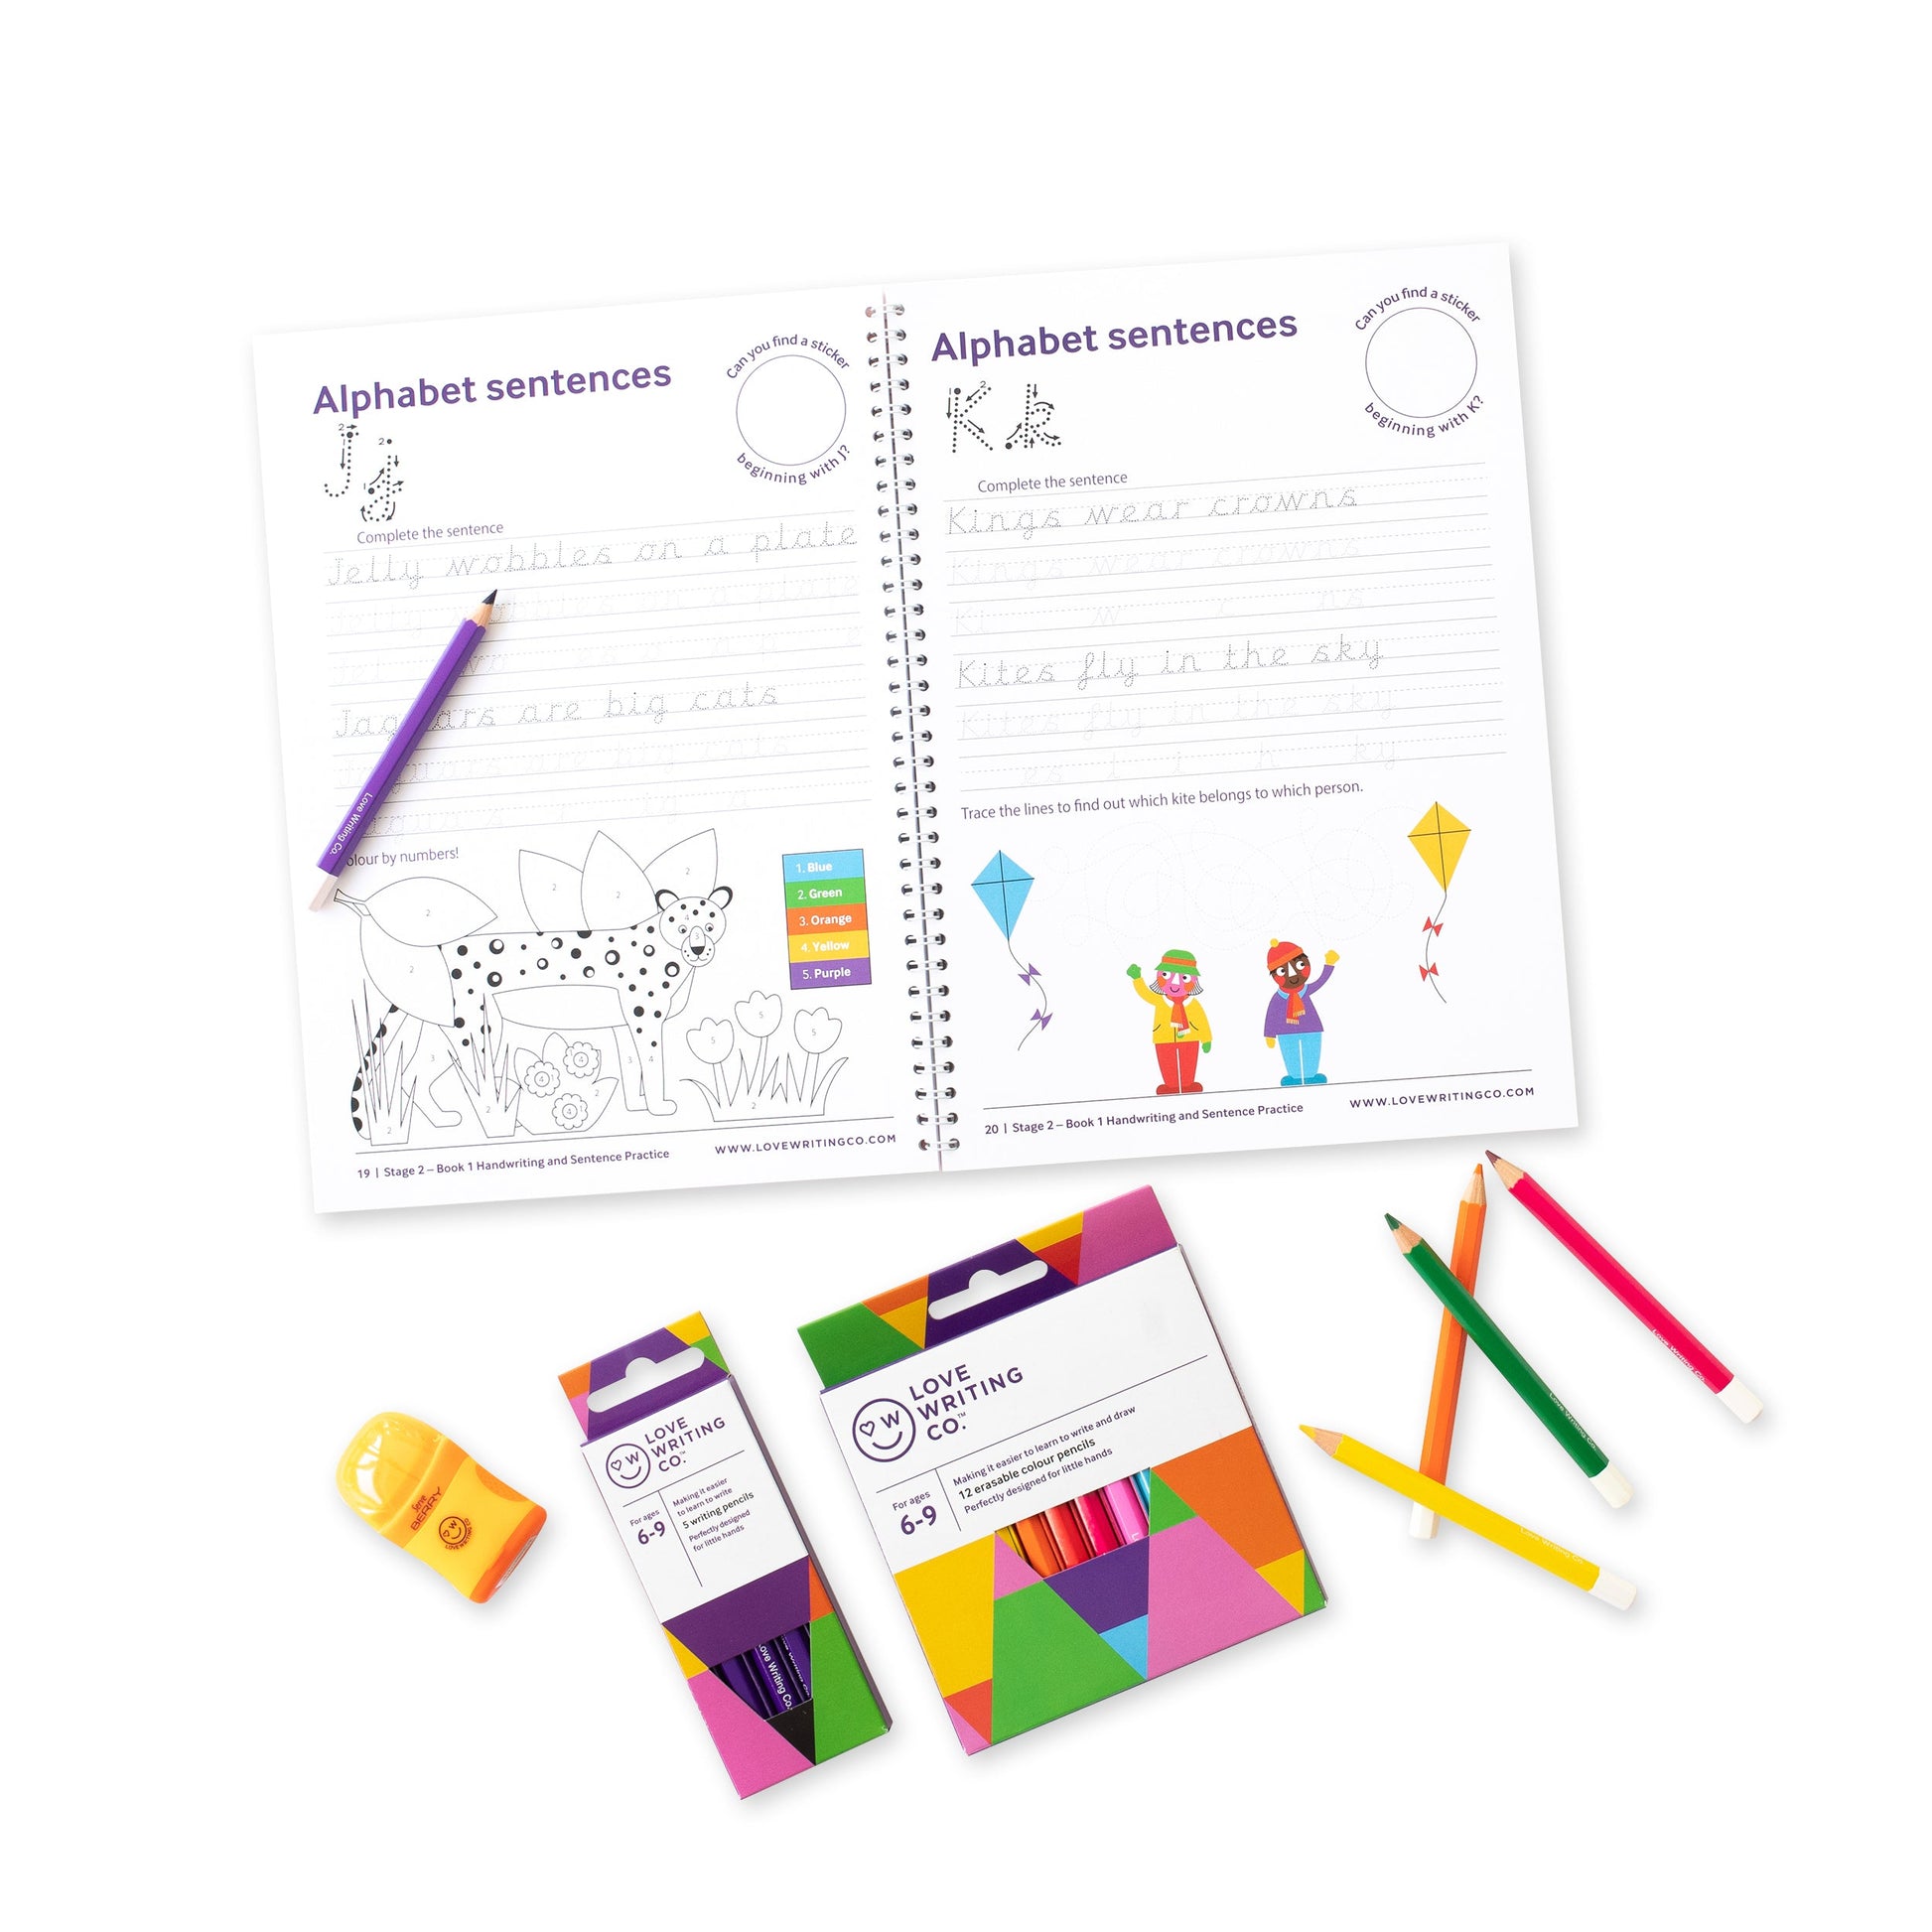 Activity pack with stickers pencils rubber eraser sharpener duo learn to write with correct tripod grip handwriting practice